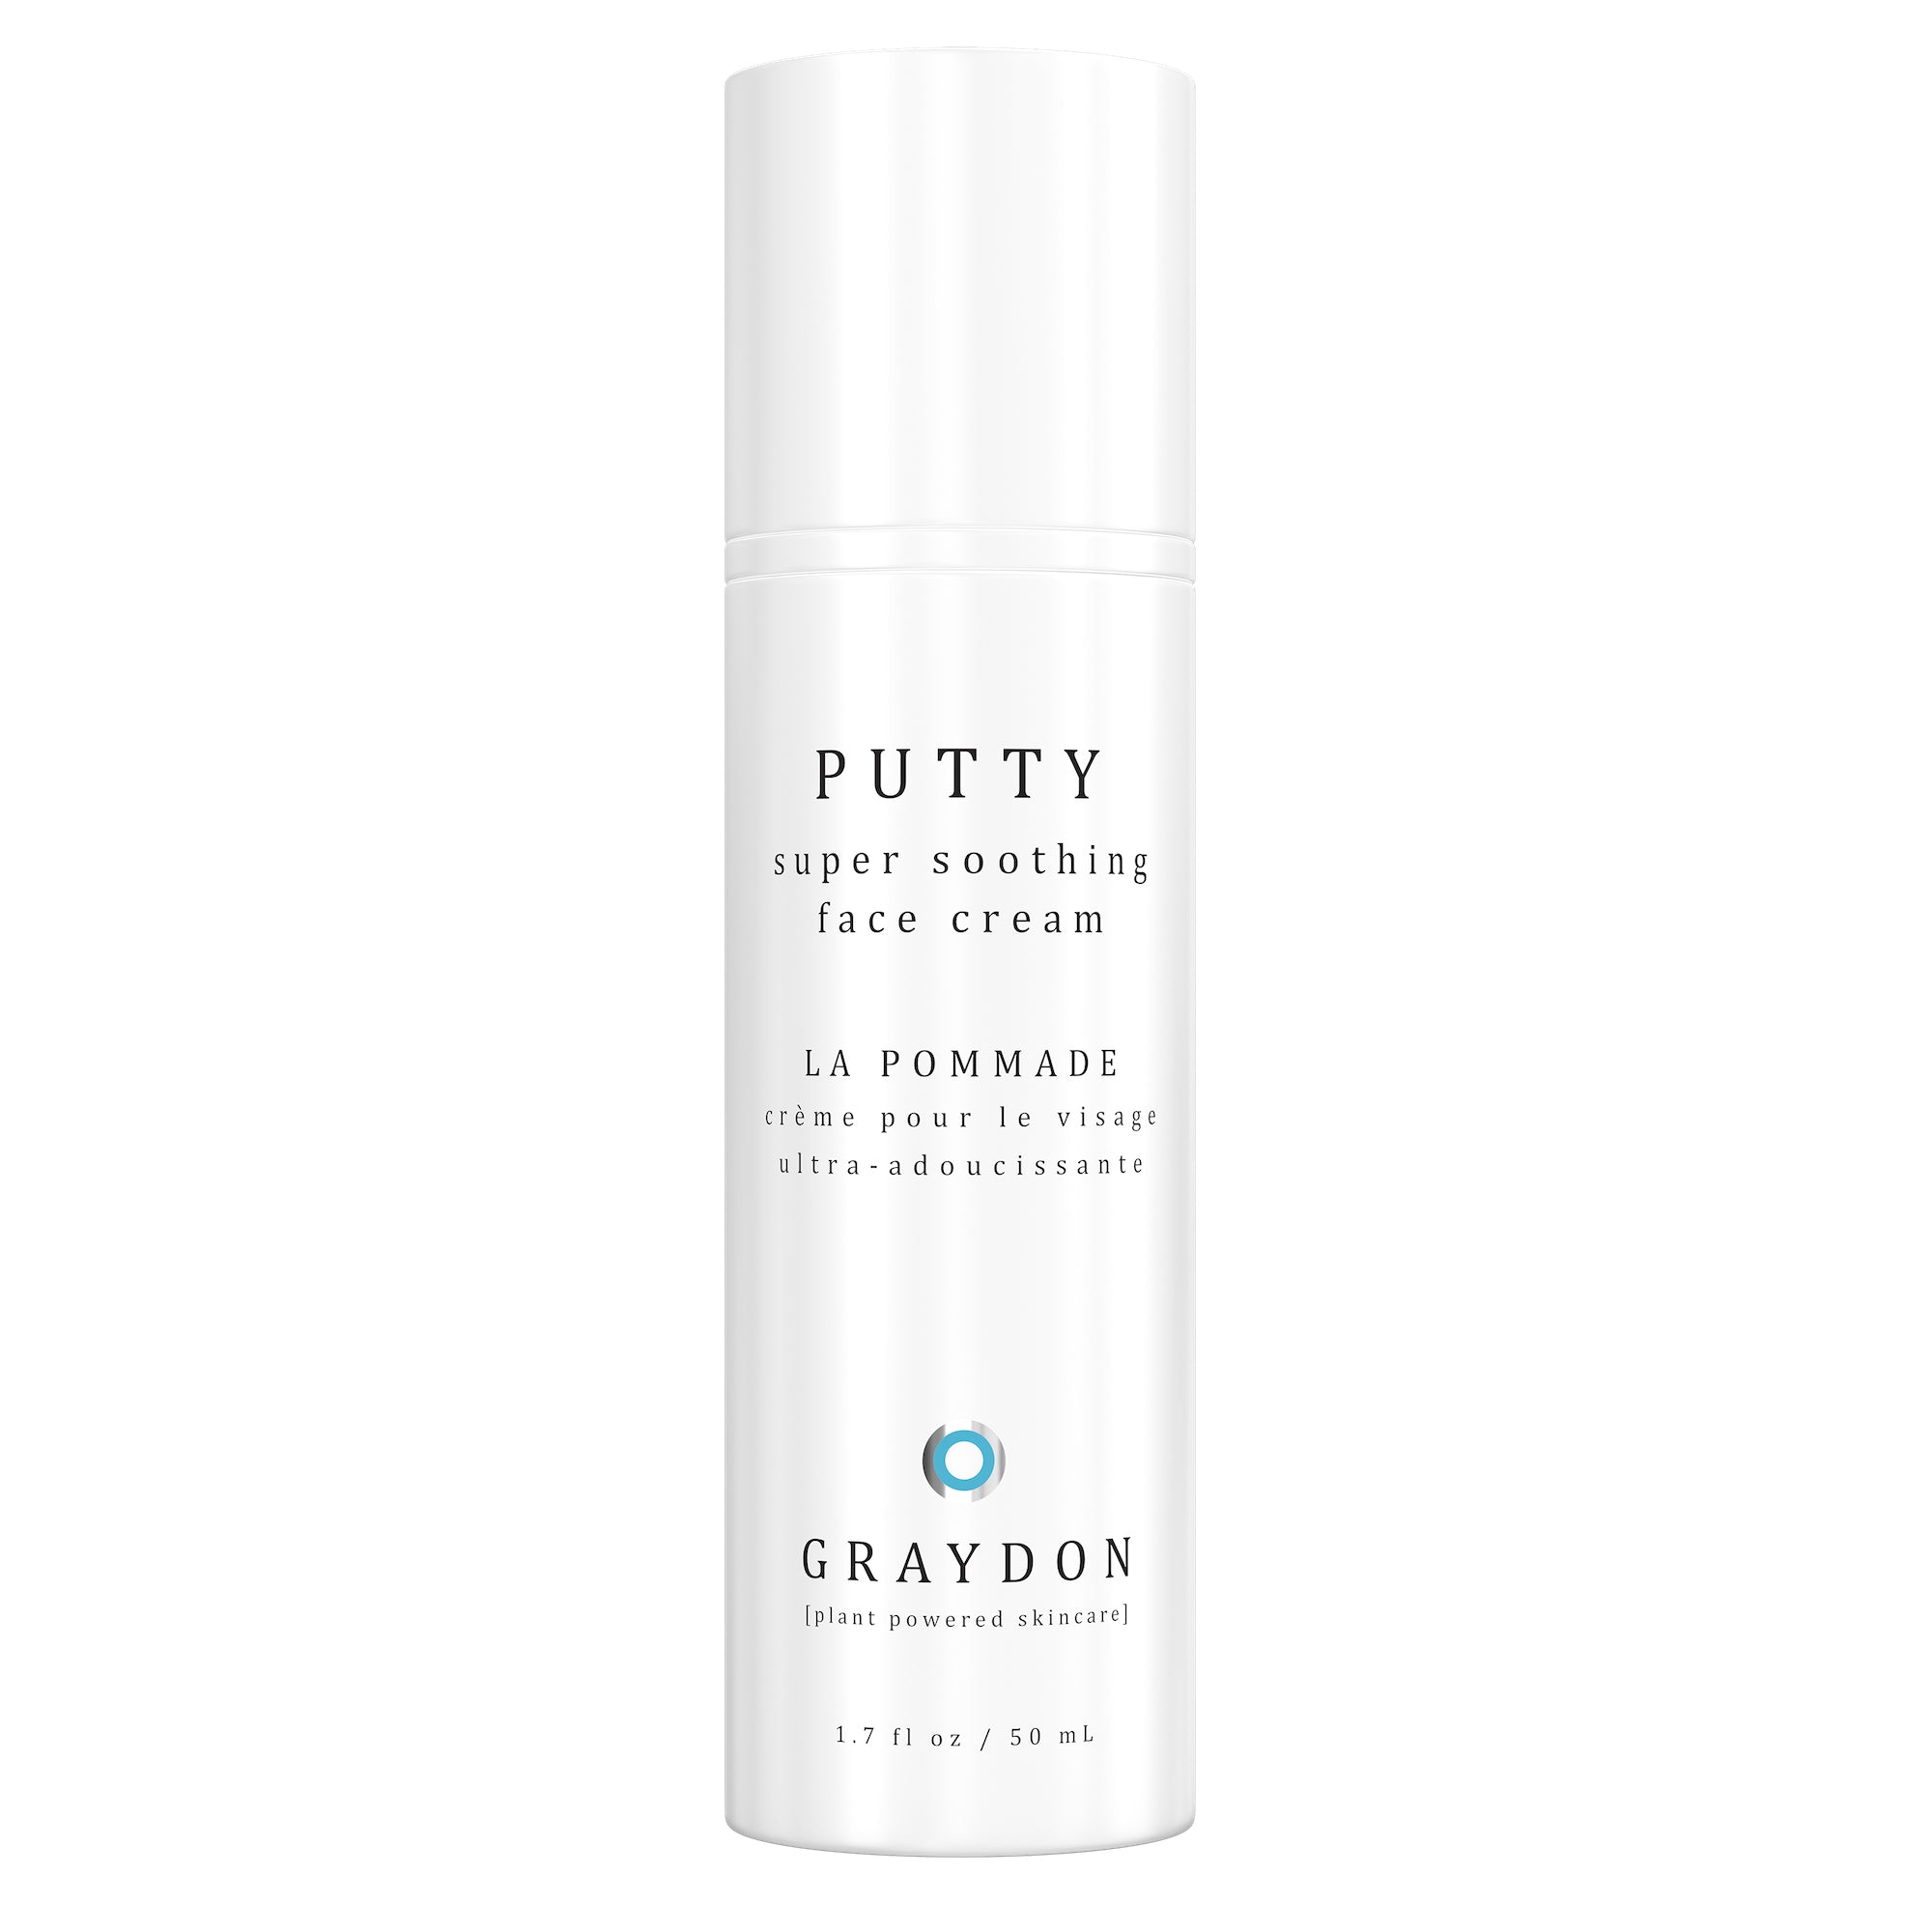 Putty - Super Soothing Face Cream